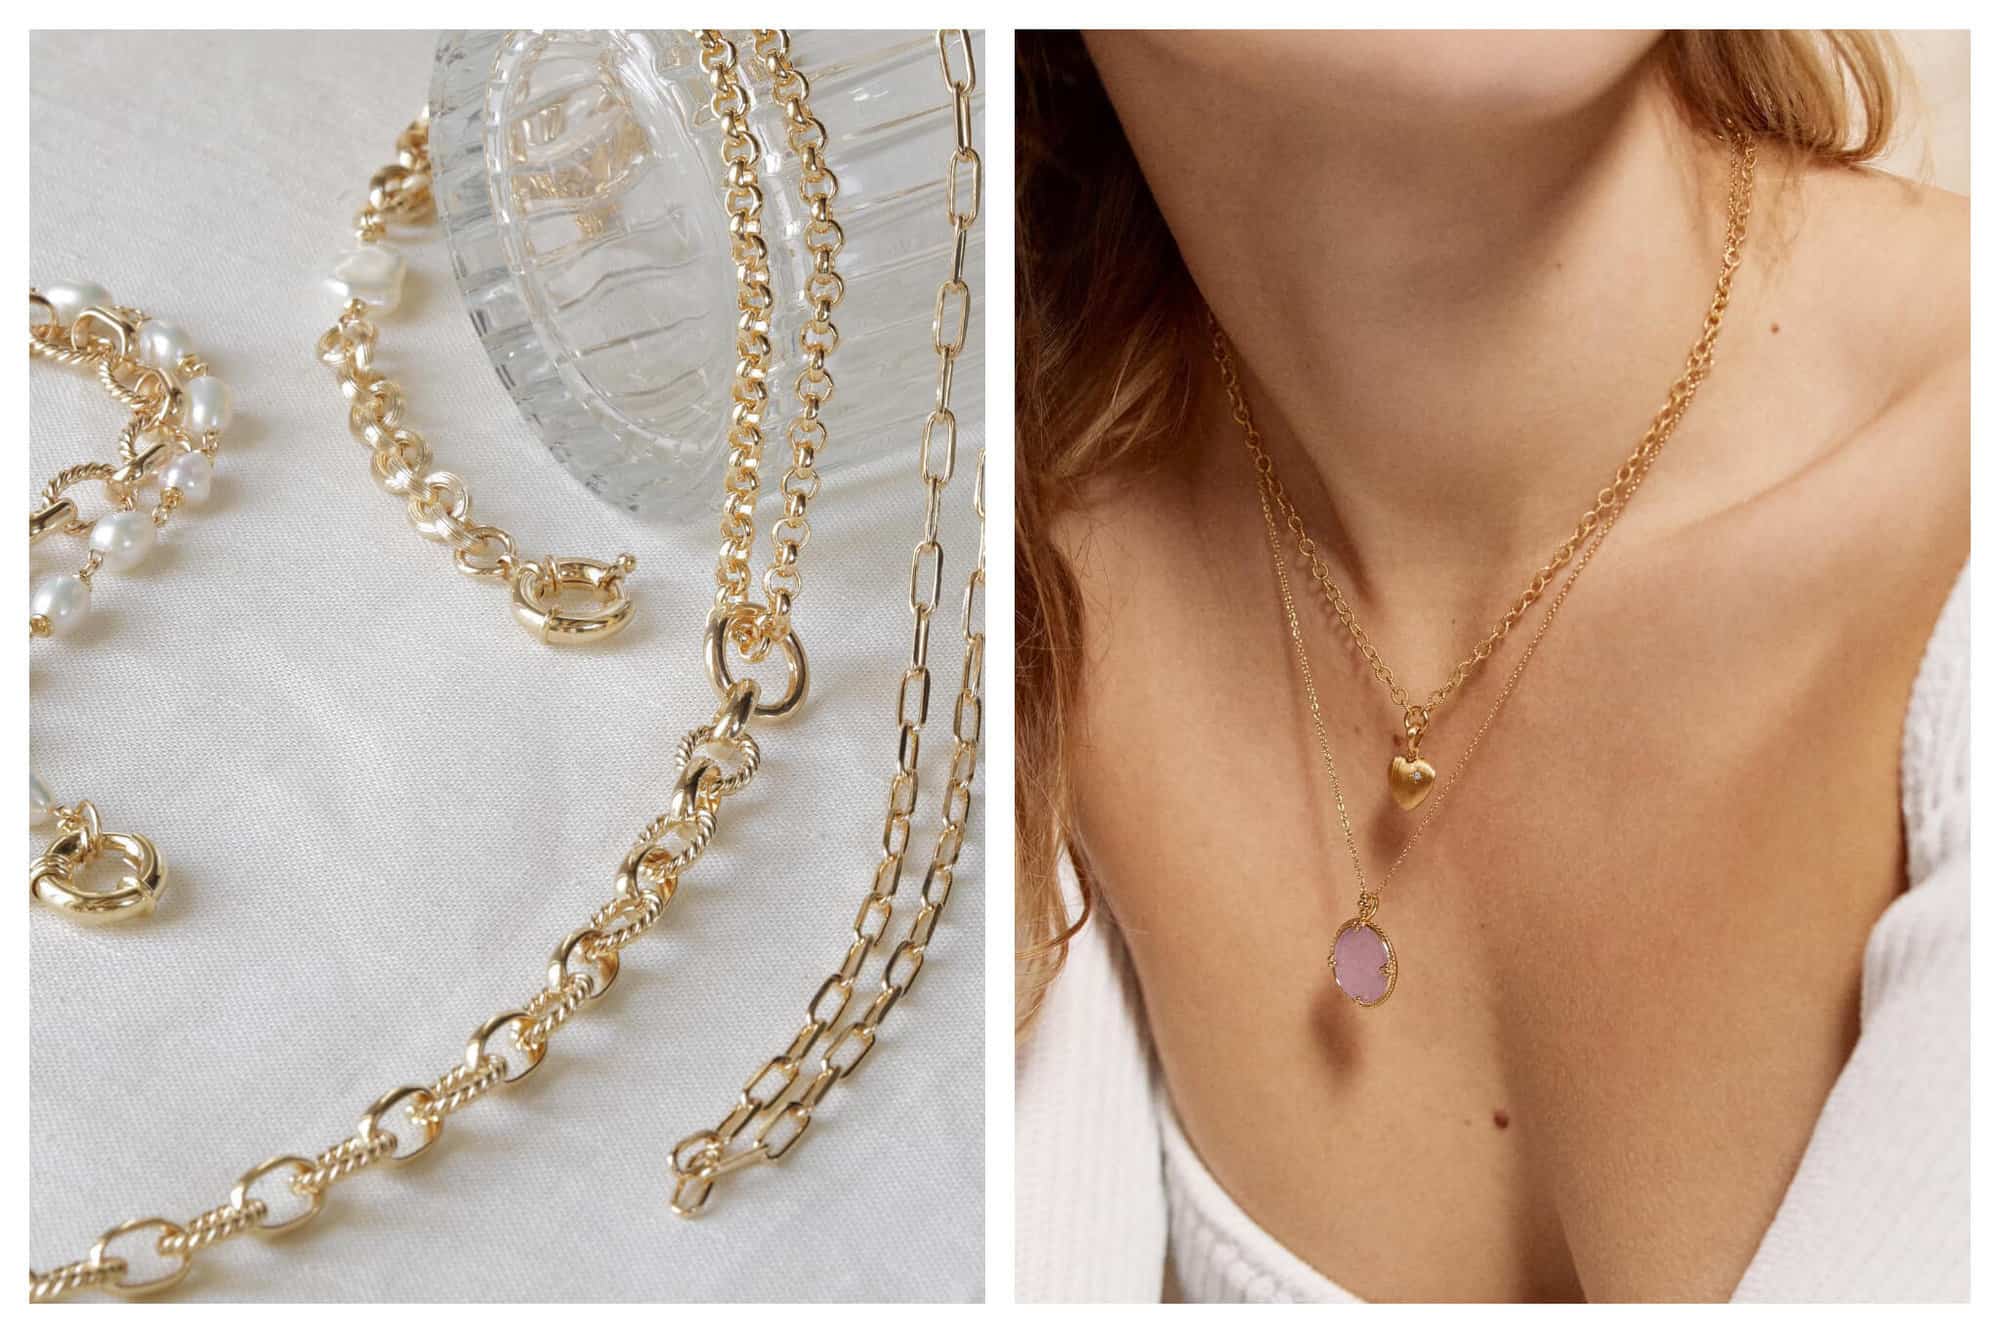 Left: gold chain bracelets or necklaces with pearls by Bôneur. Right: a close up of a woman's chest wearing two gold necklaces by Bôneur. 